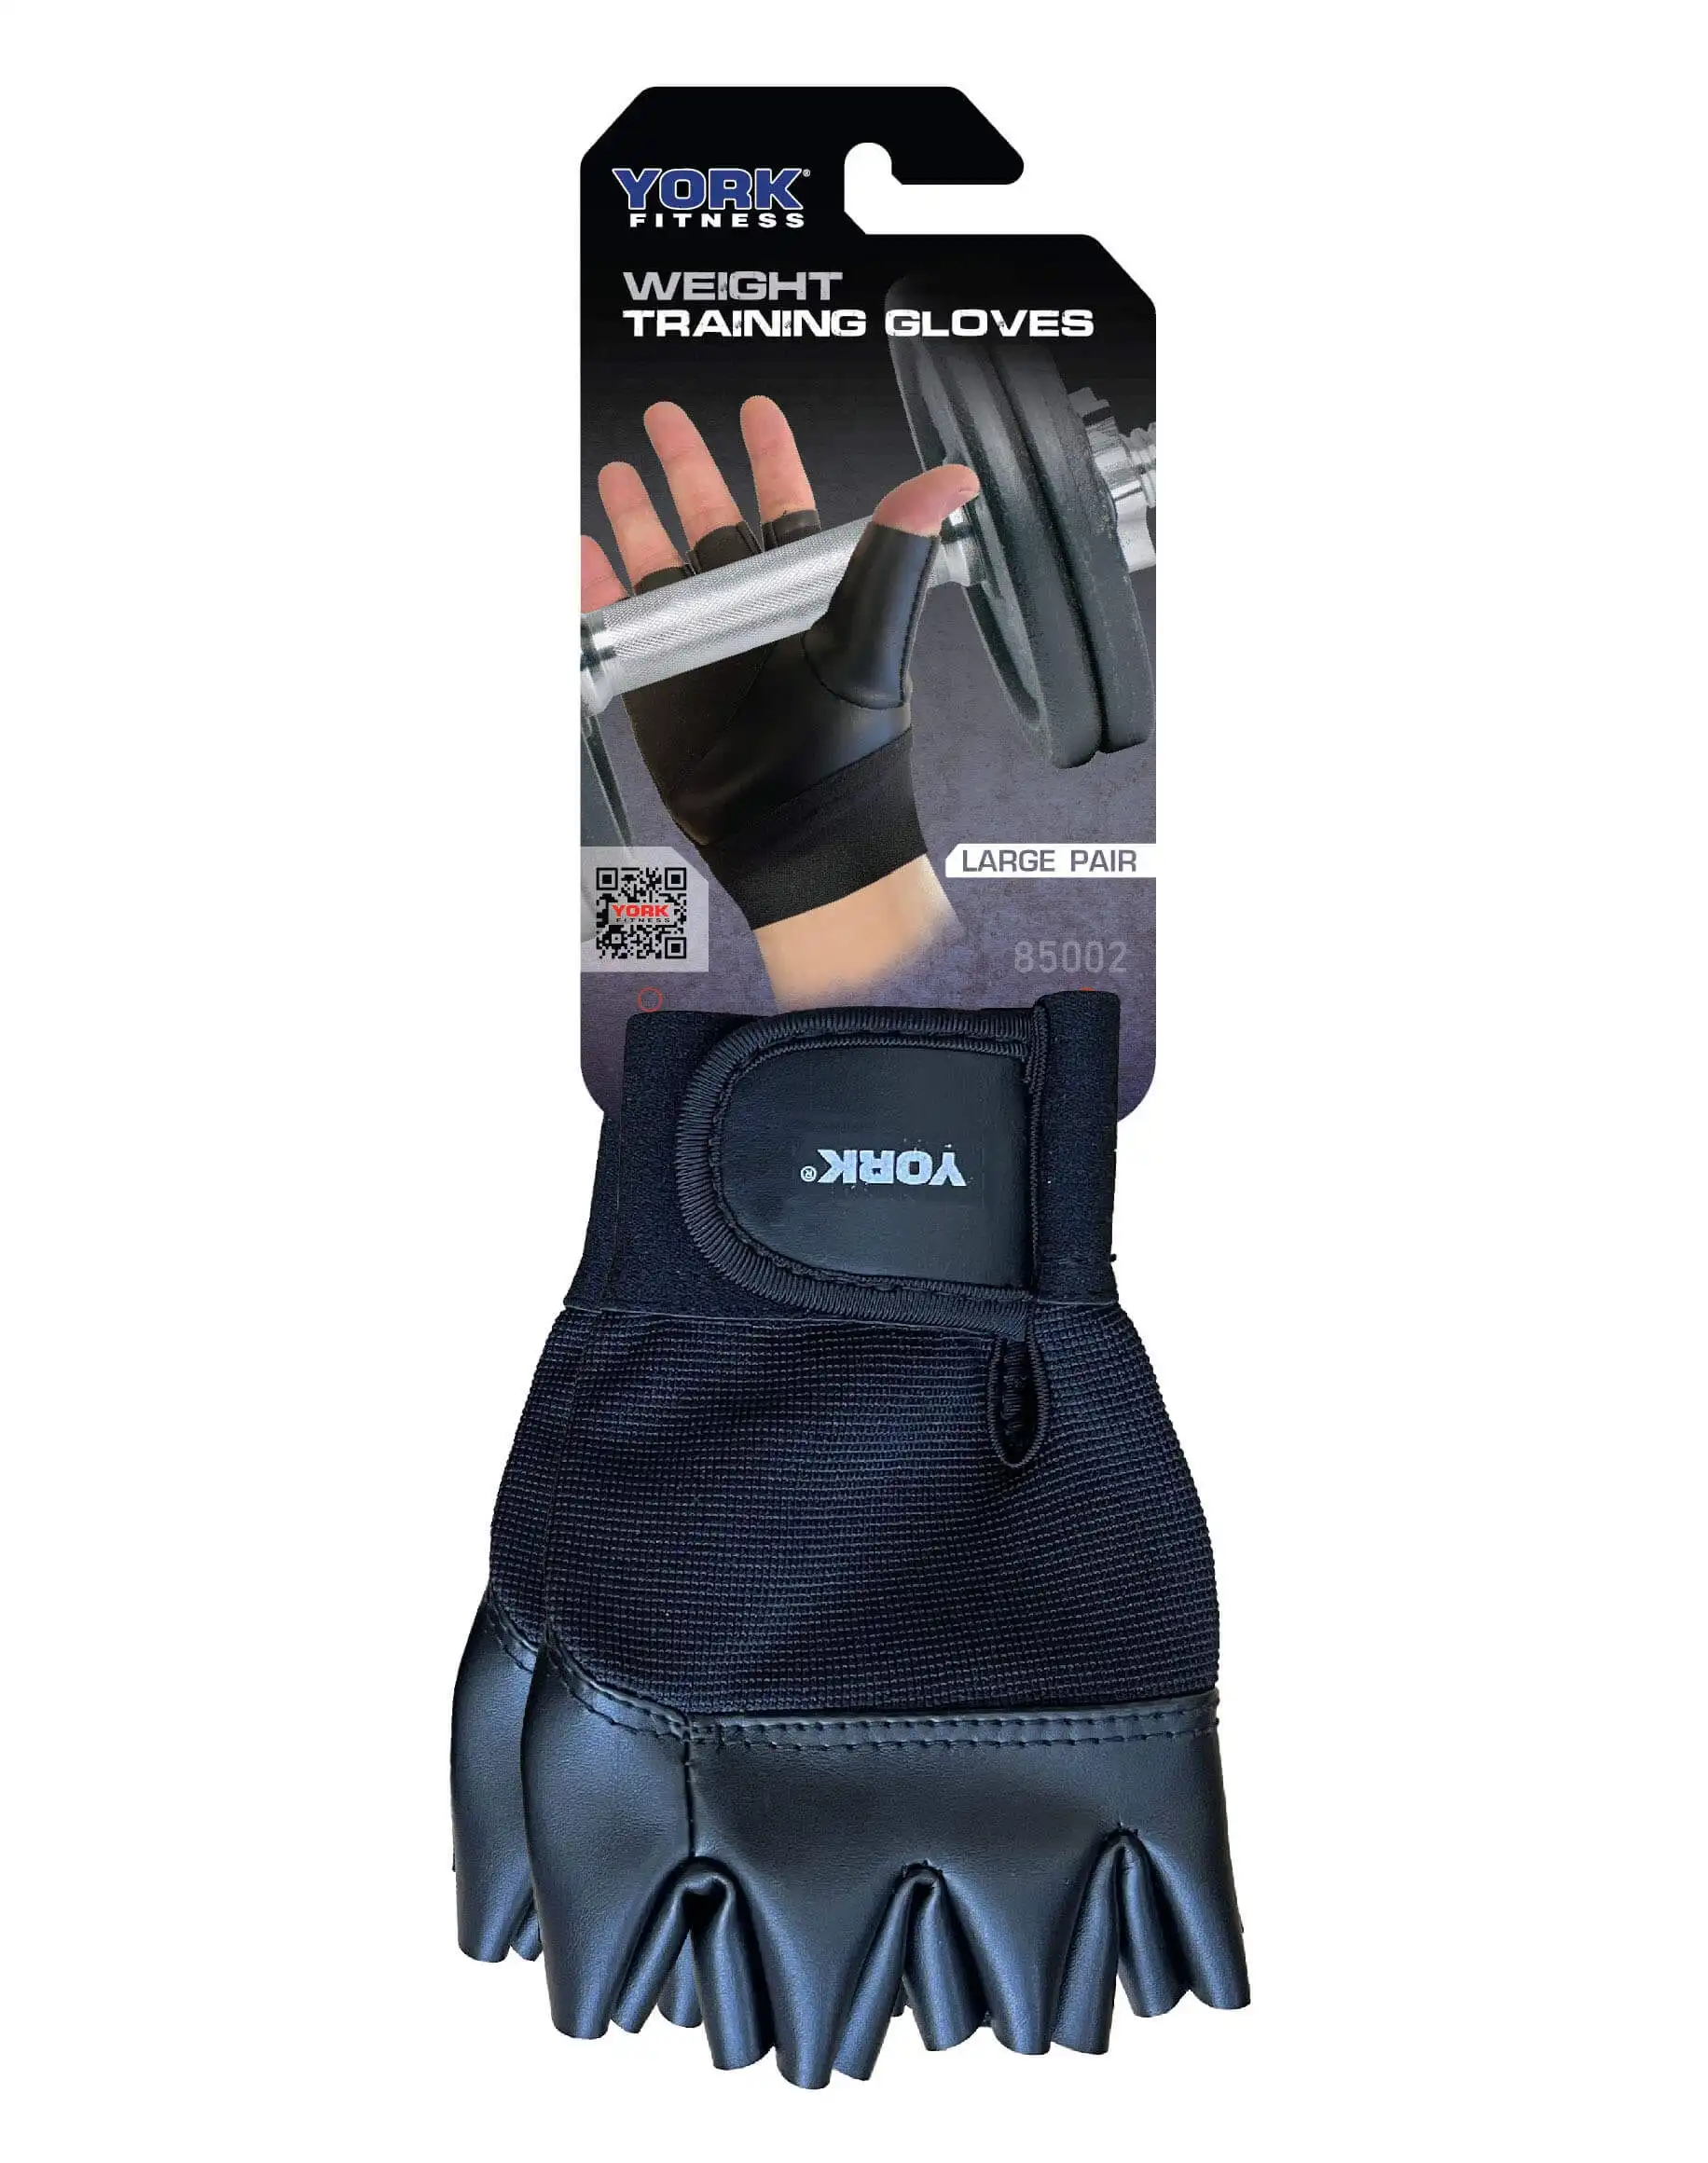 York Fitness Weight Training Gloves - Large